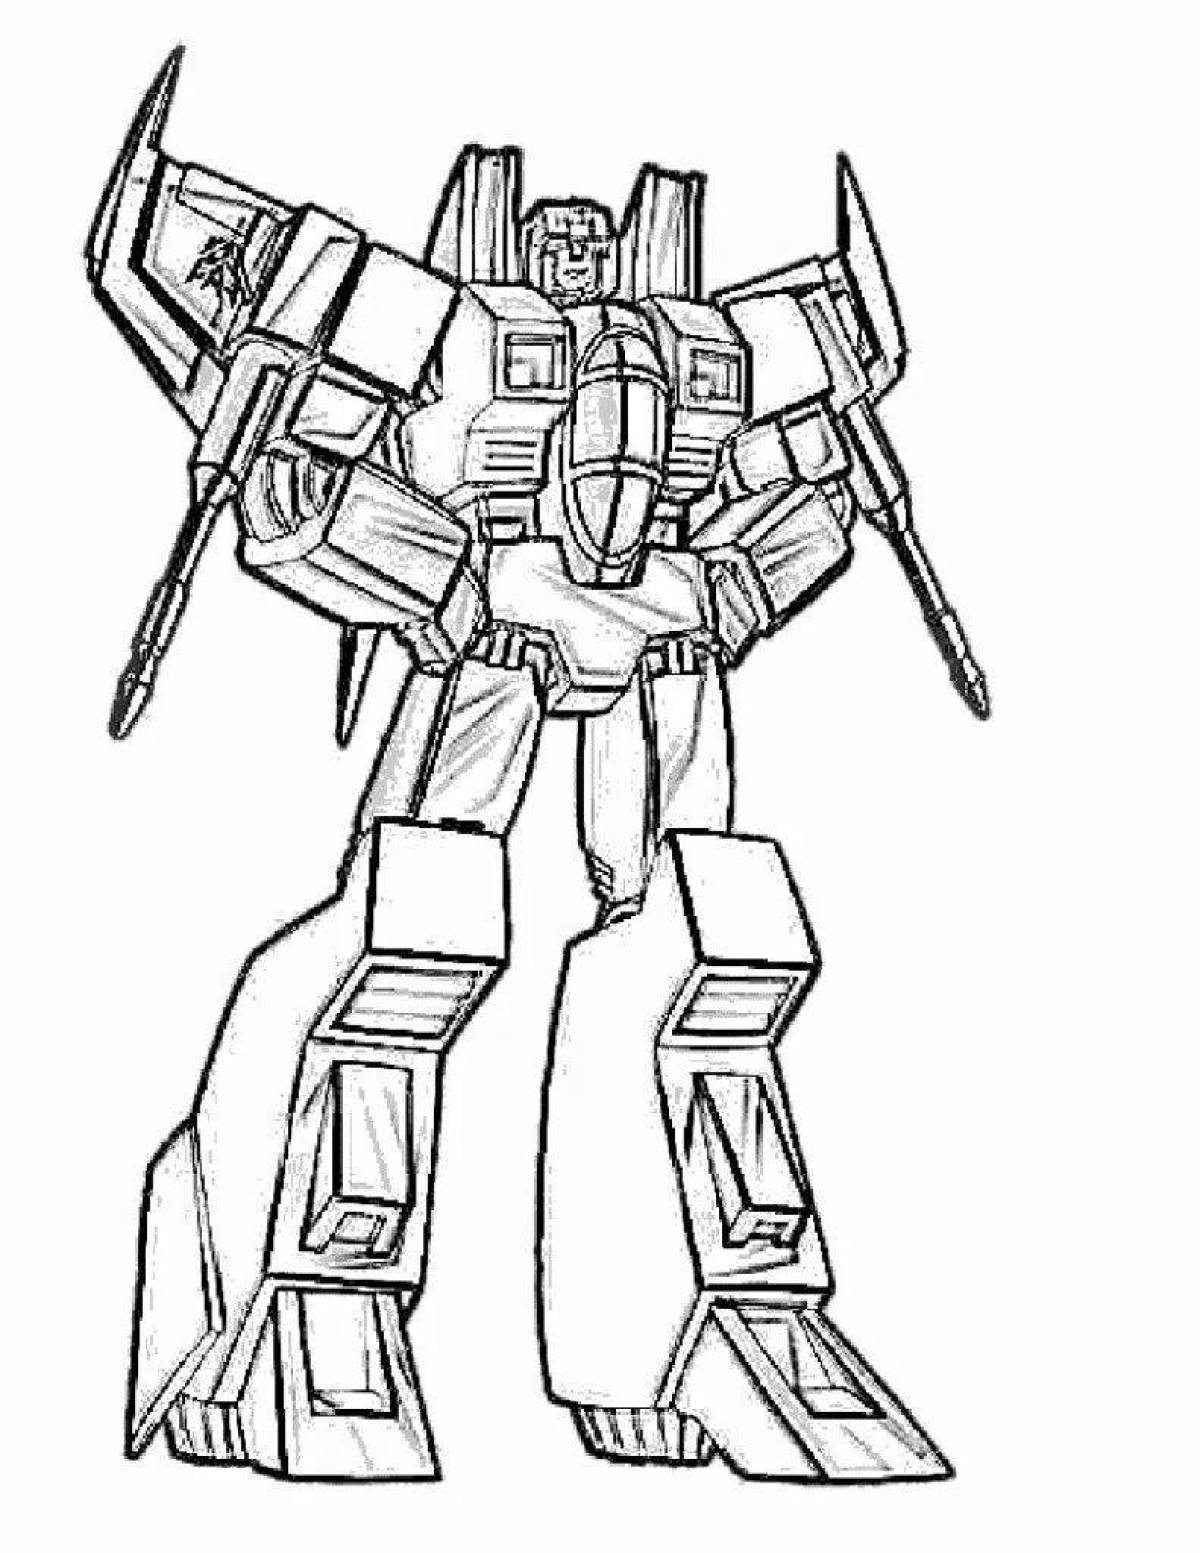 Awesome Decepticon coloring pages